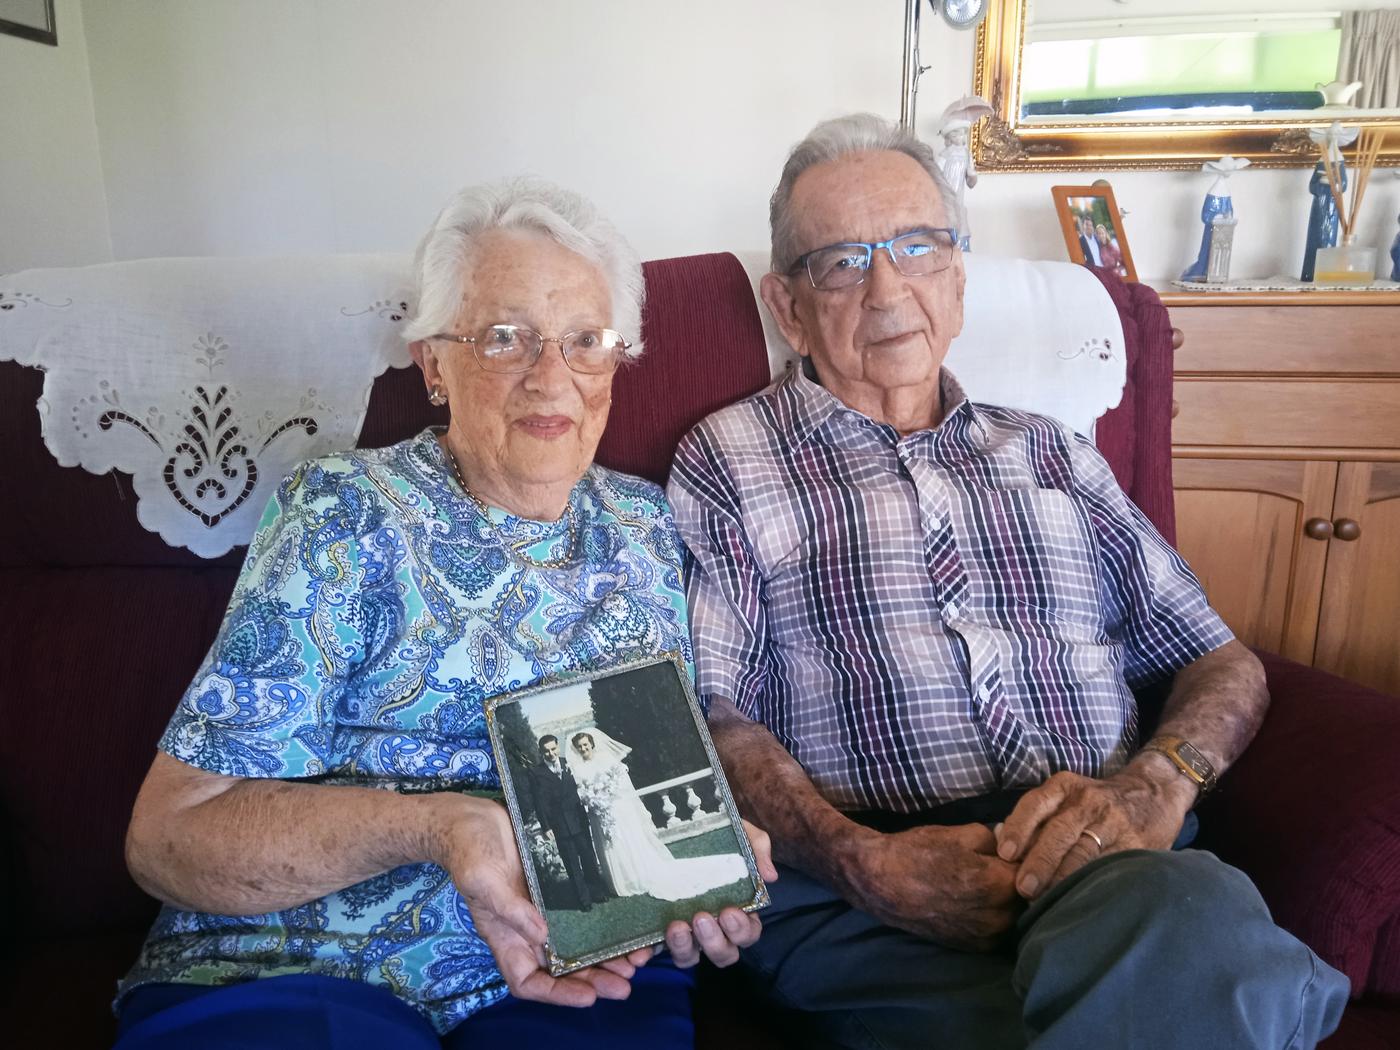 Still holding hands and sharing housework – 72 years of marriage bliss